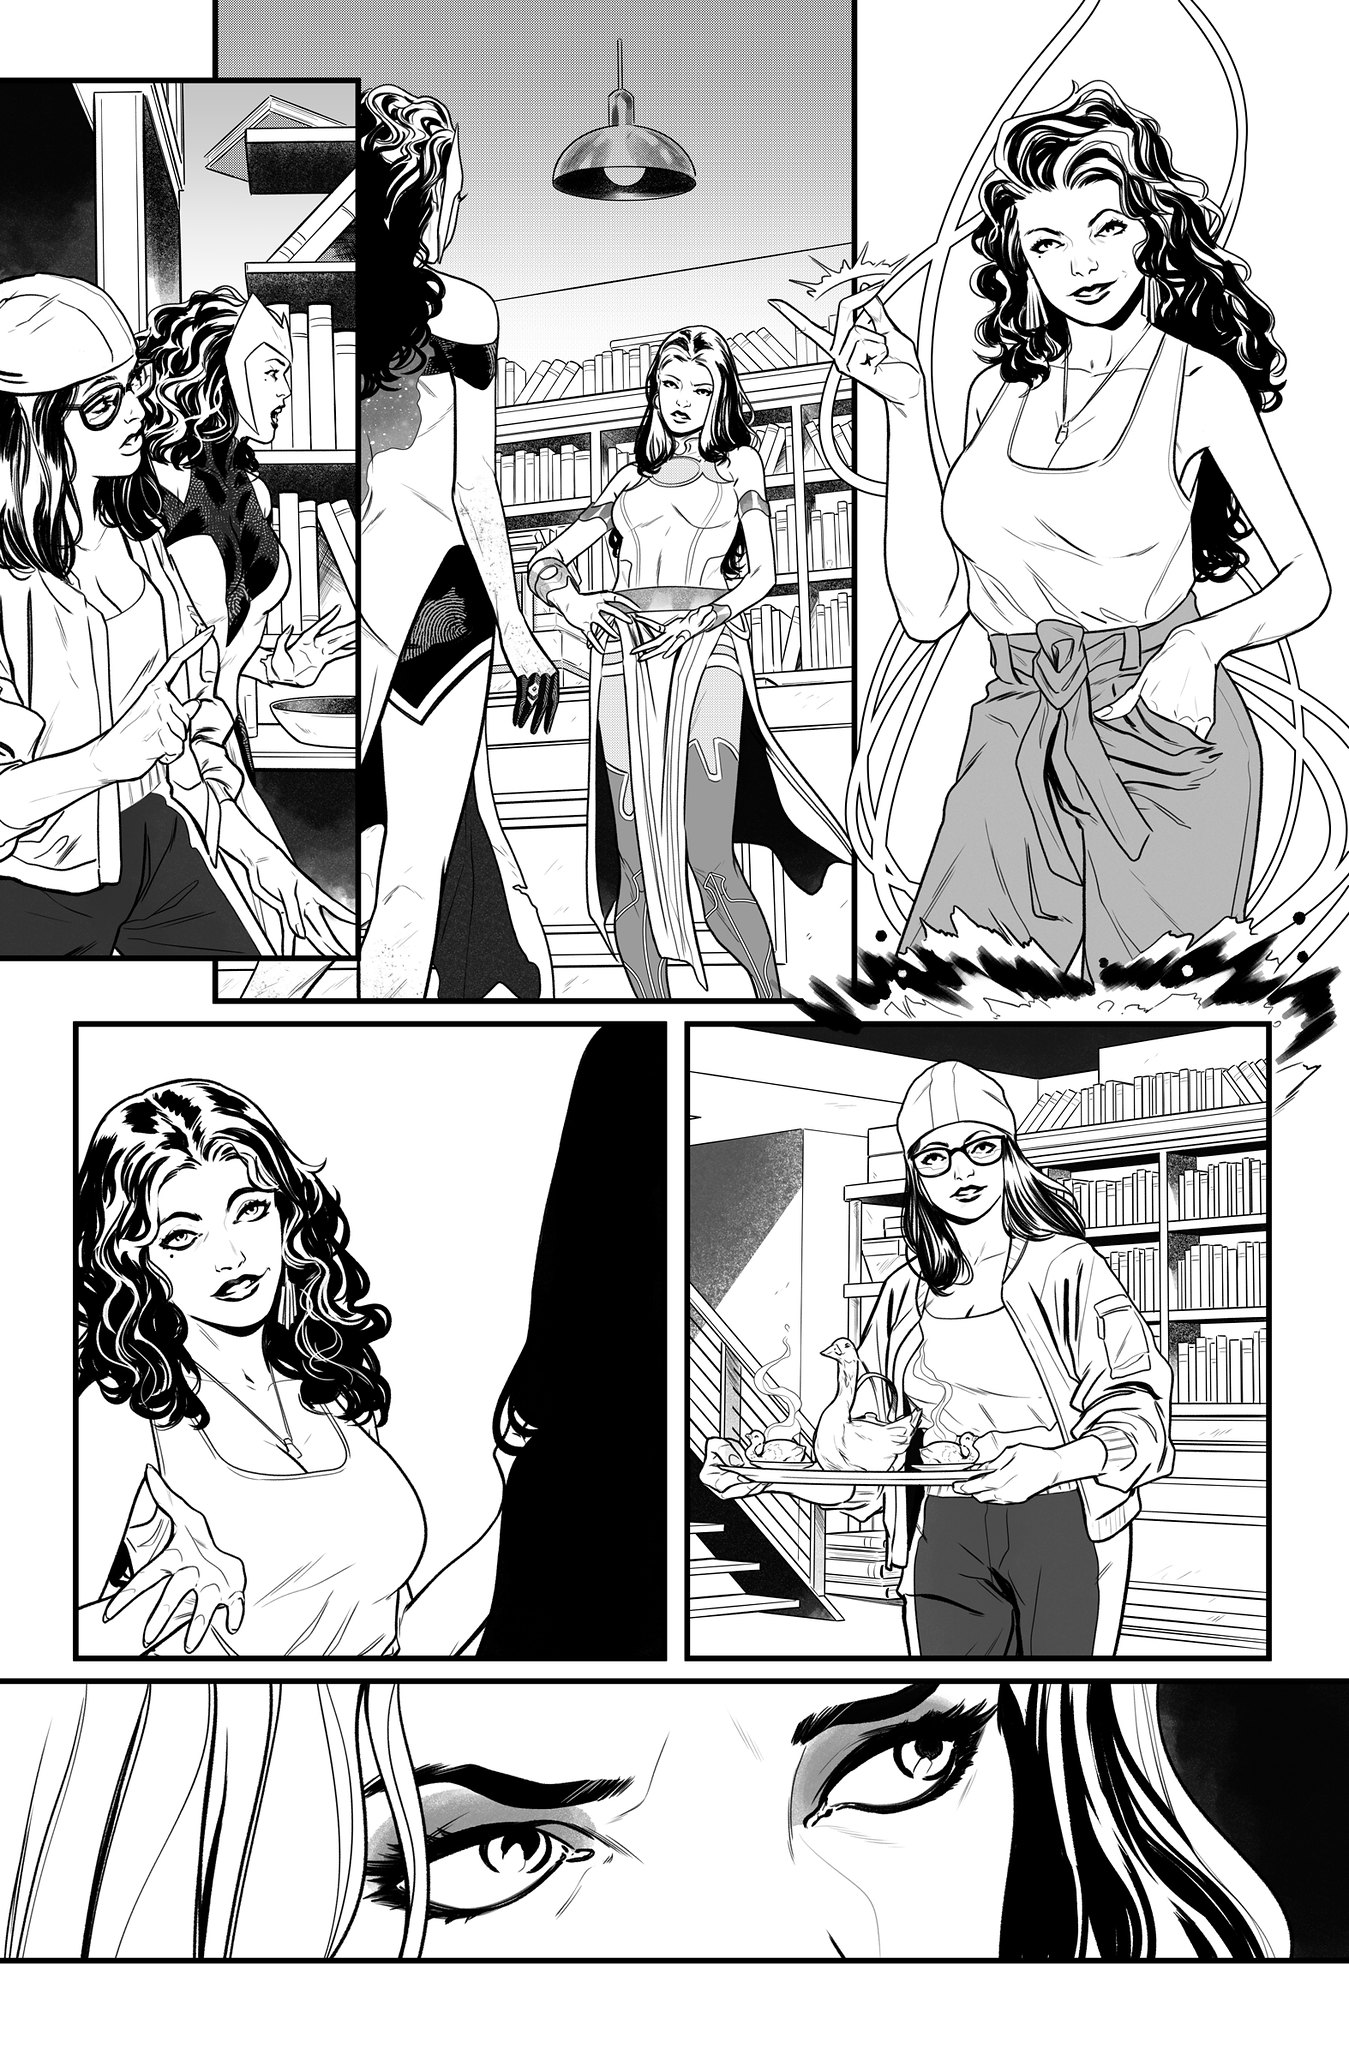 SCARLET_WITCH_ANNUAL_PAGE11_INKS